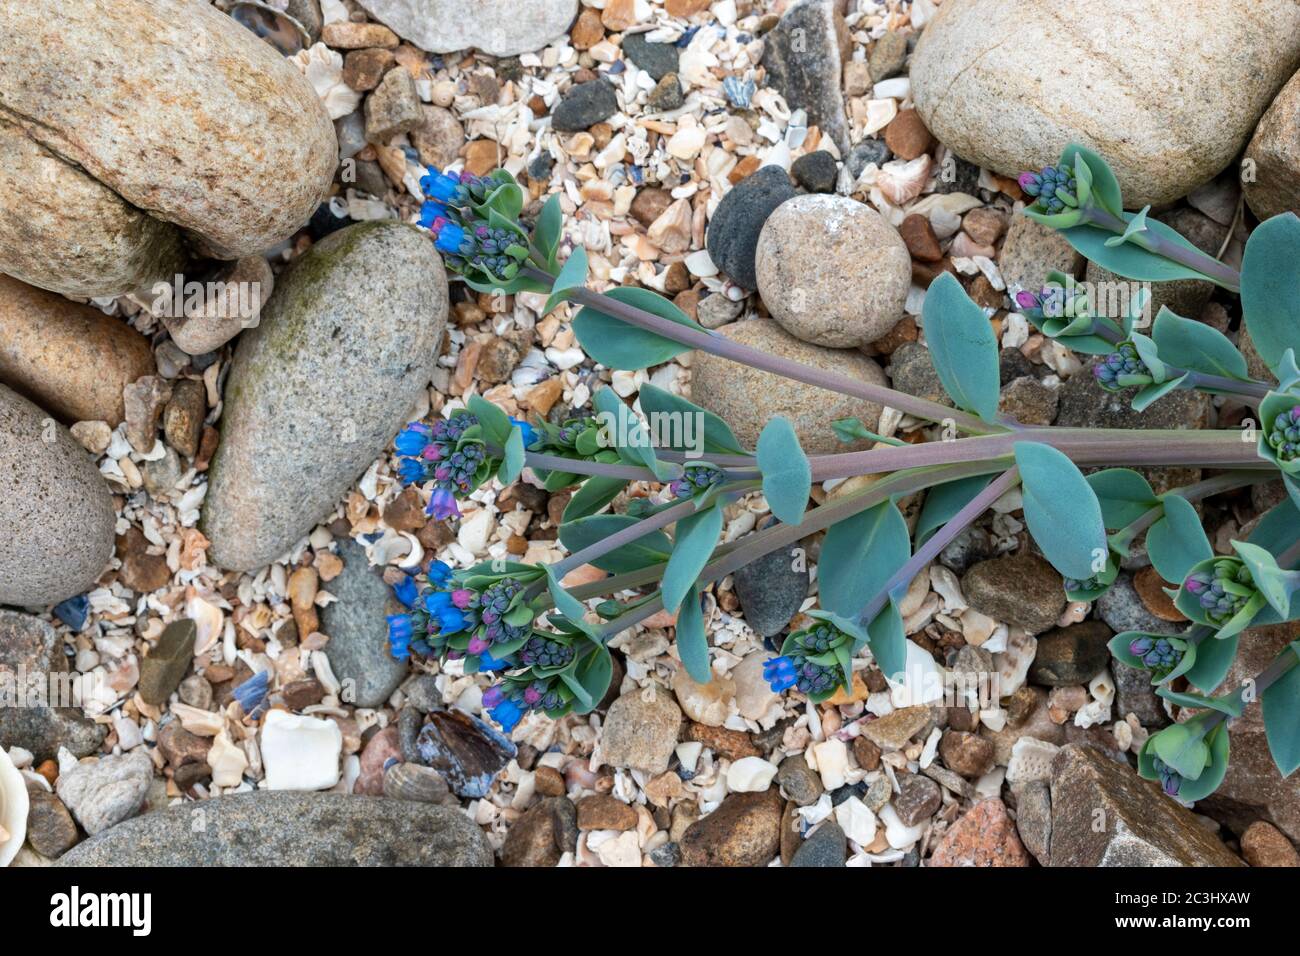 OYSTERPLANT Mertensia maritima A SMALL BLUE GREEN PLANT AND STEMS WITH BRIGHT BLUE FLOWERS ON A SEASHELL AND ROCK COVERED BEACH MORAY COAST SCOTLAND Stock Photo